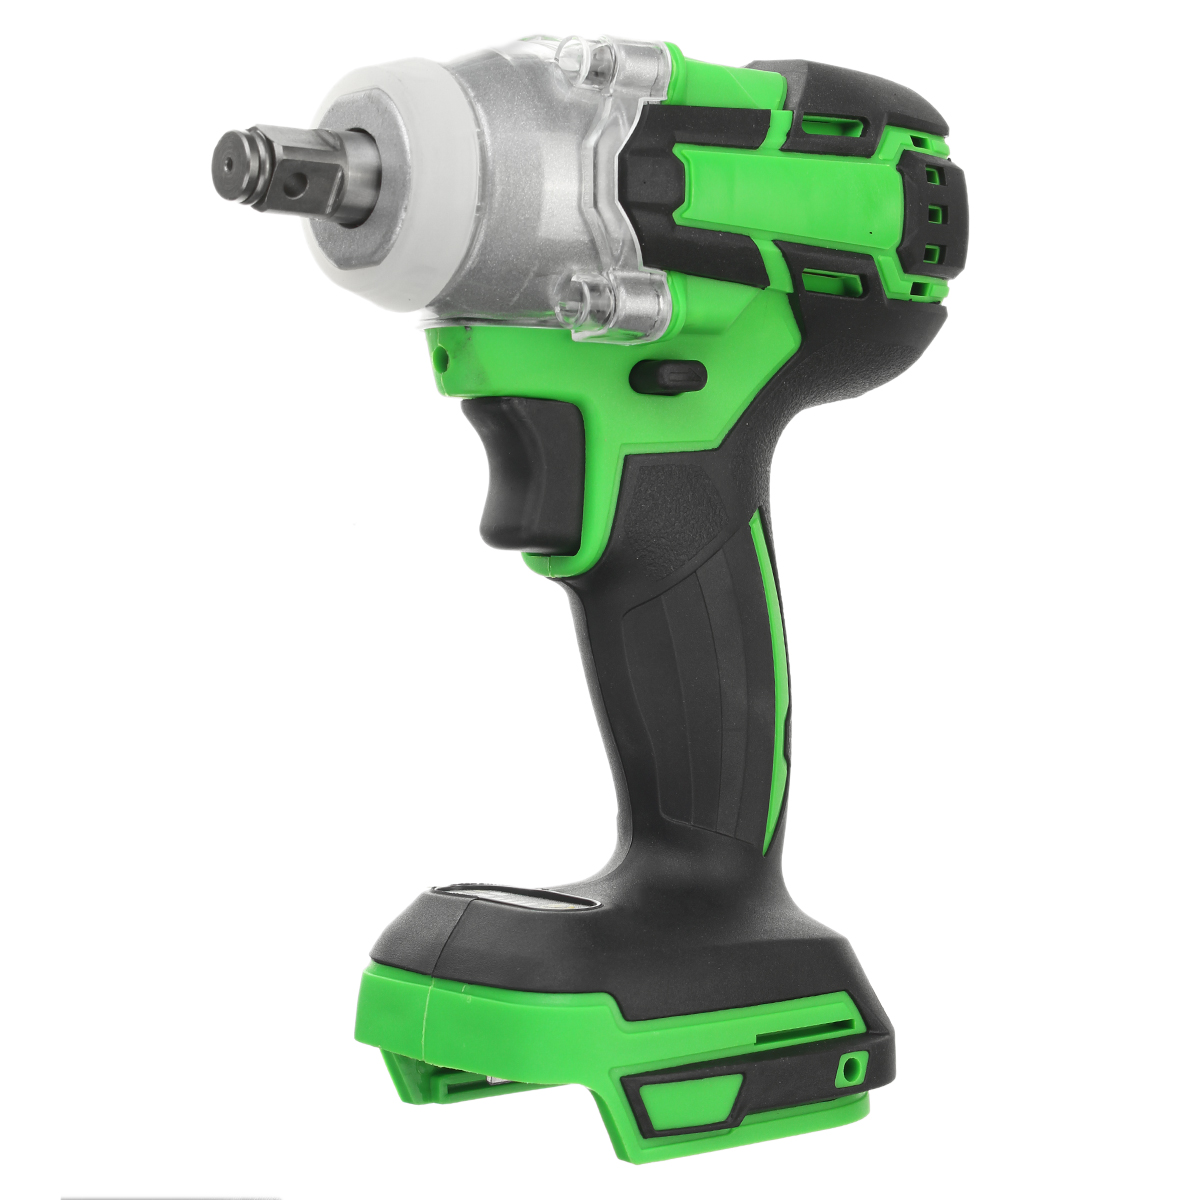 

520N.M Torque Brushless Impact Wrench Screwdriver Cordless Rechargable Electric Wrench Driver Tool Stepless Speed Change